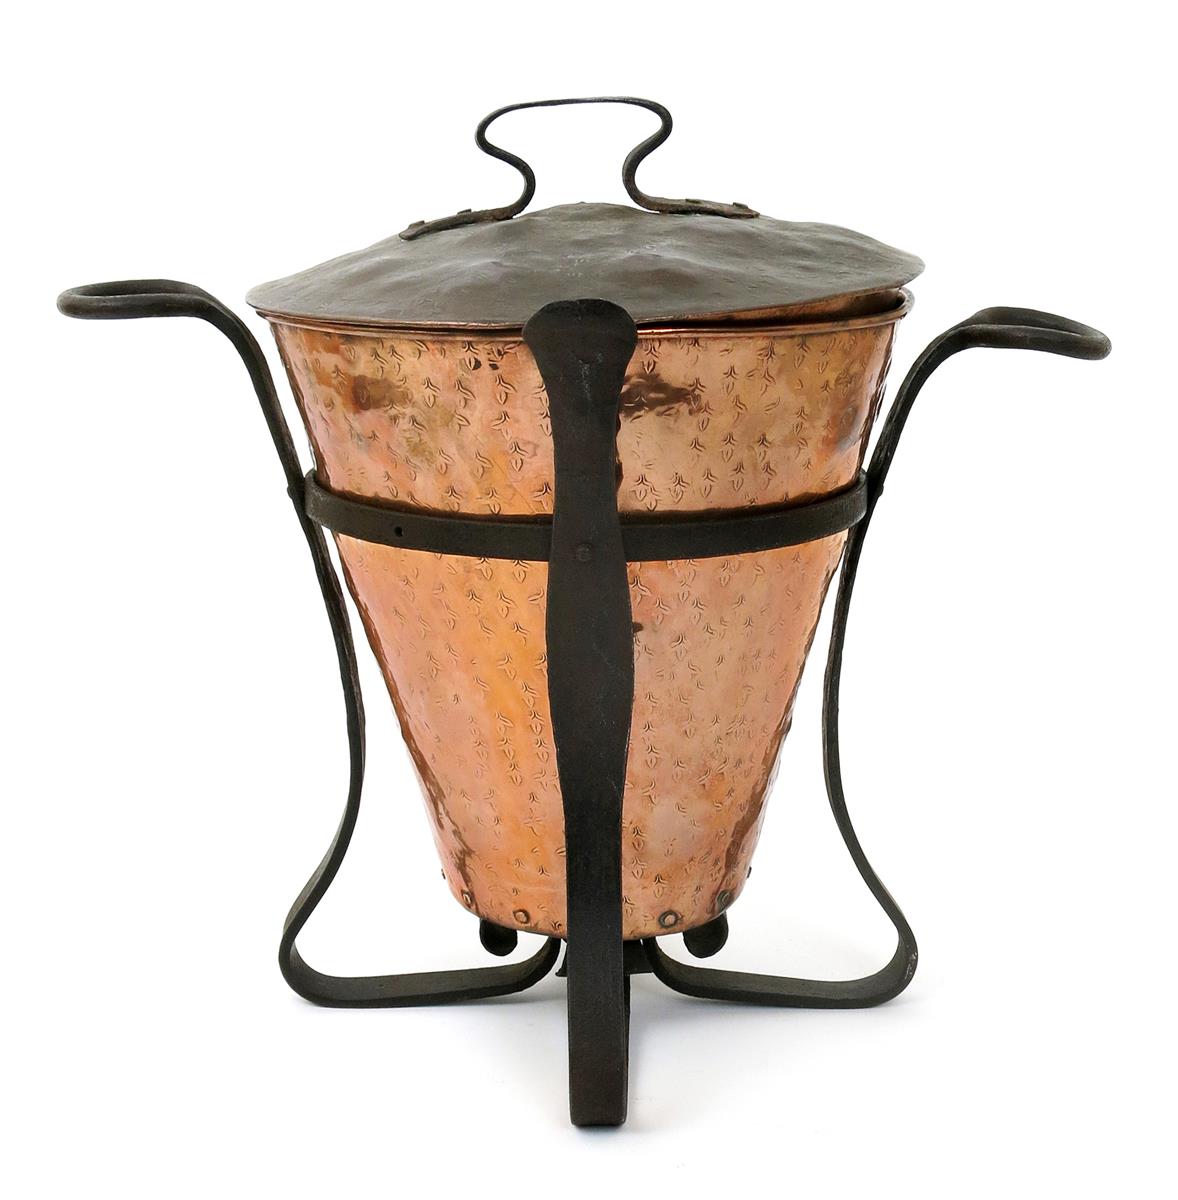 A wrought iron mounted coal bin and cover, flaring cylindrical form with hammered finish, a large - Image 2 of 3